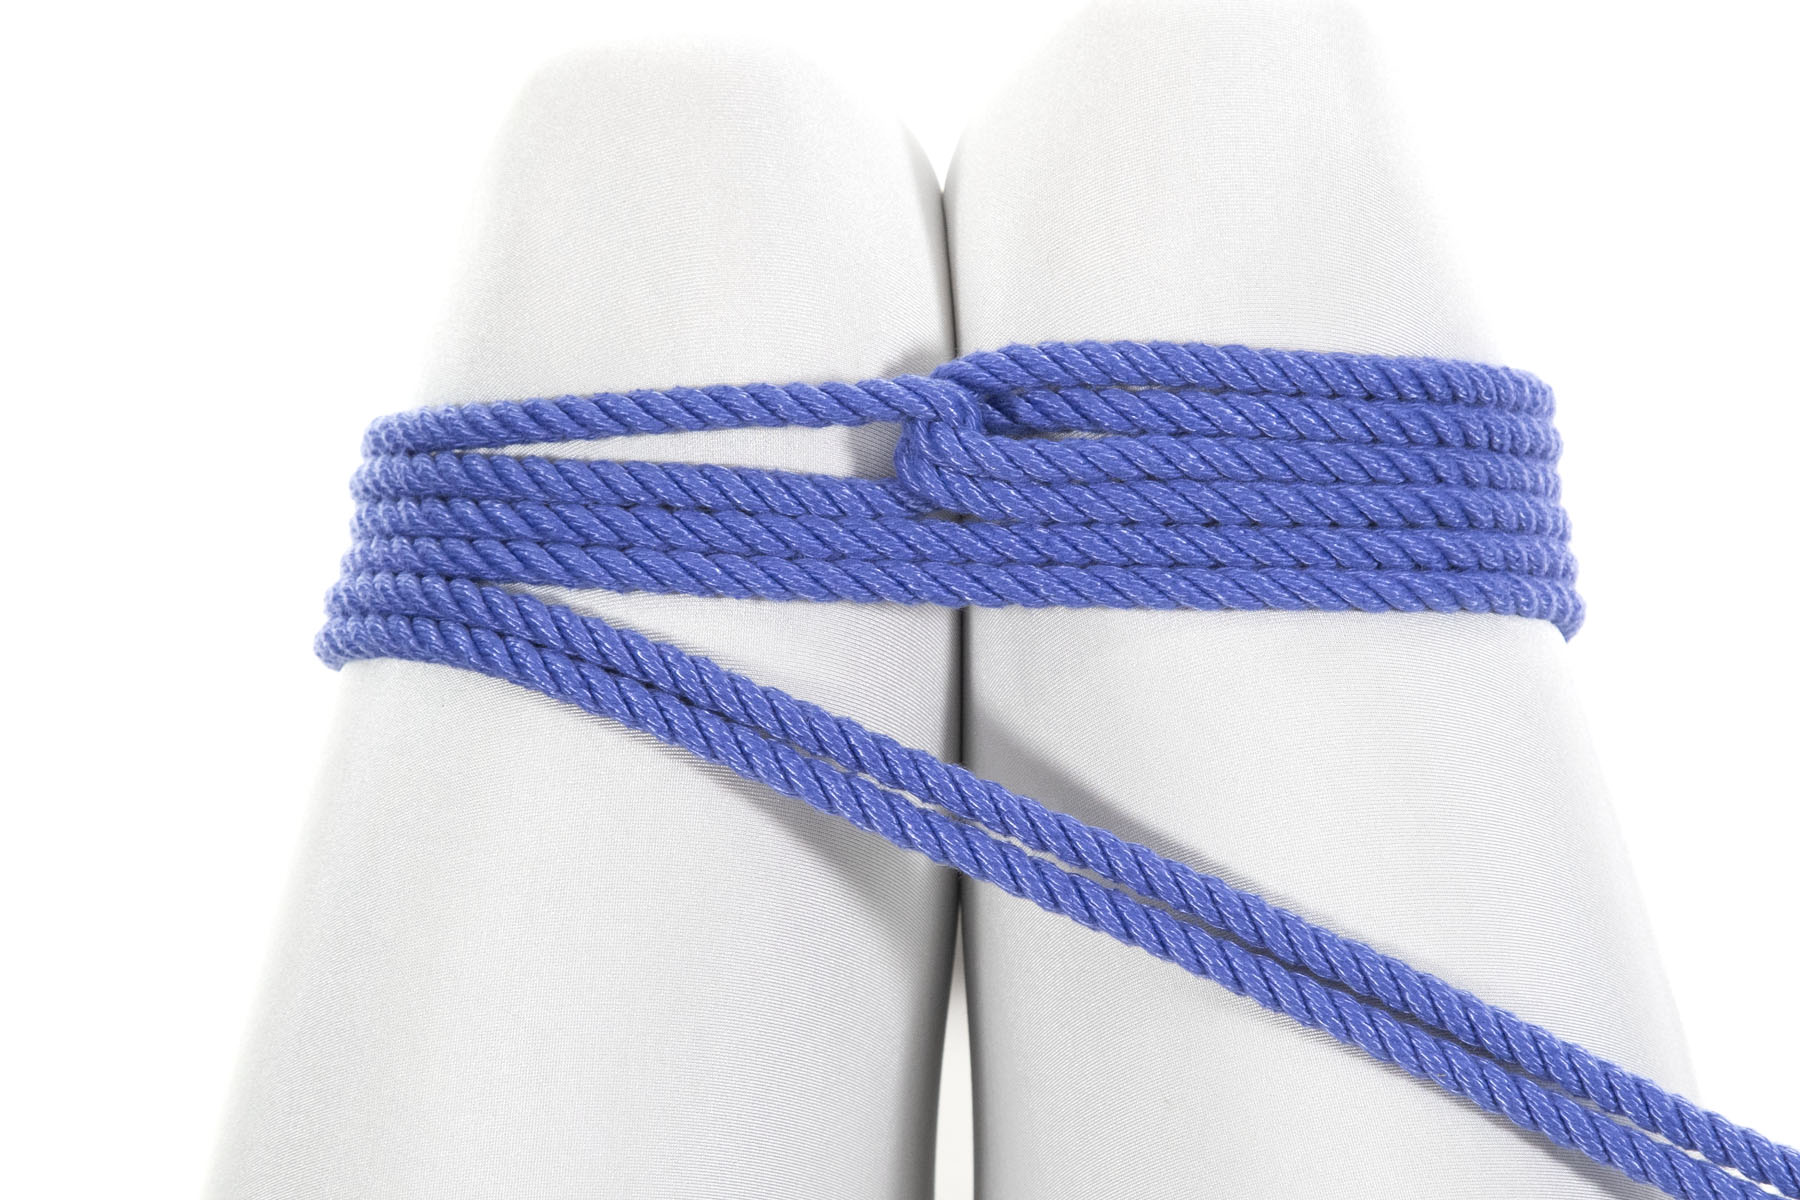 We are looking down at the legs of a person in a white bodysuit, seated in a chair. A doubled blue rope binds the legs together just above the knee. The bight of the rope lies just above the knee and the rope goes around the legs counterclockwise before making a reverse tension and reversing direction. It then makes two complete clockwise spirals, moving toward the body. Each wrap lies flat and adjacent to the previous one. The ends of the rope are pulled out of frame toward the body and to the right.